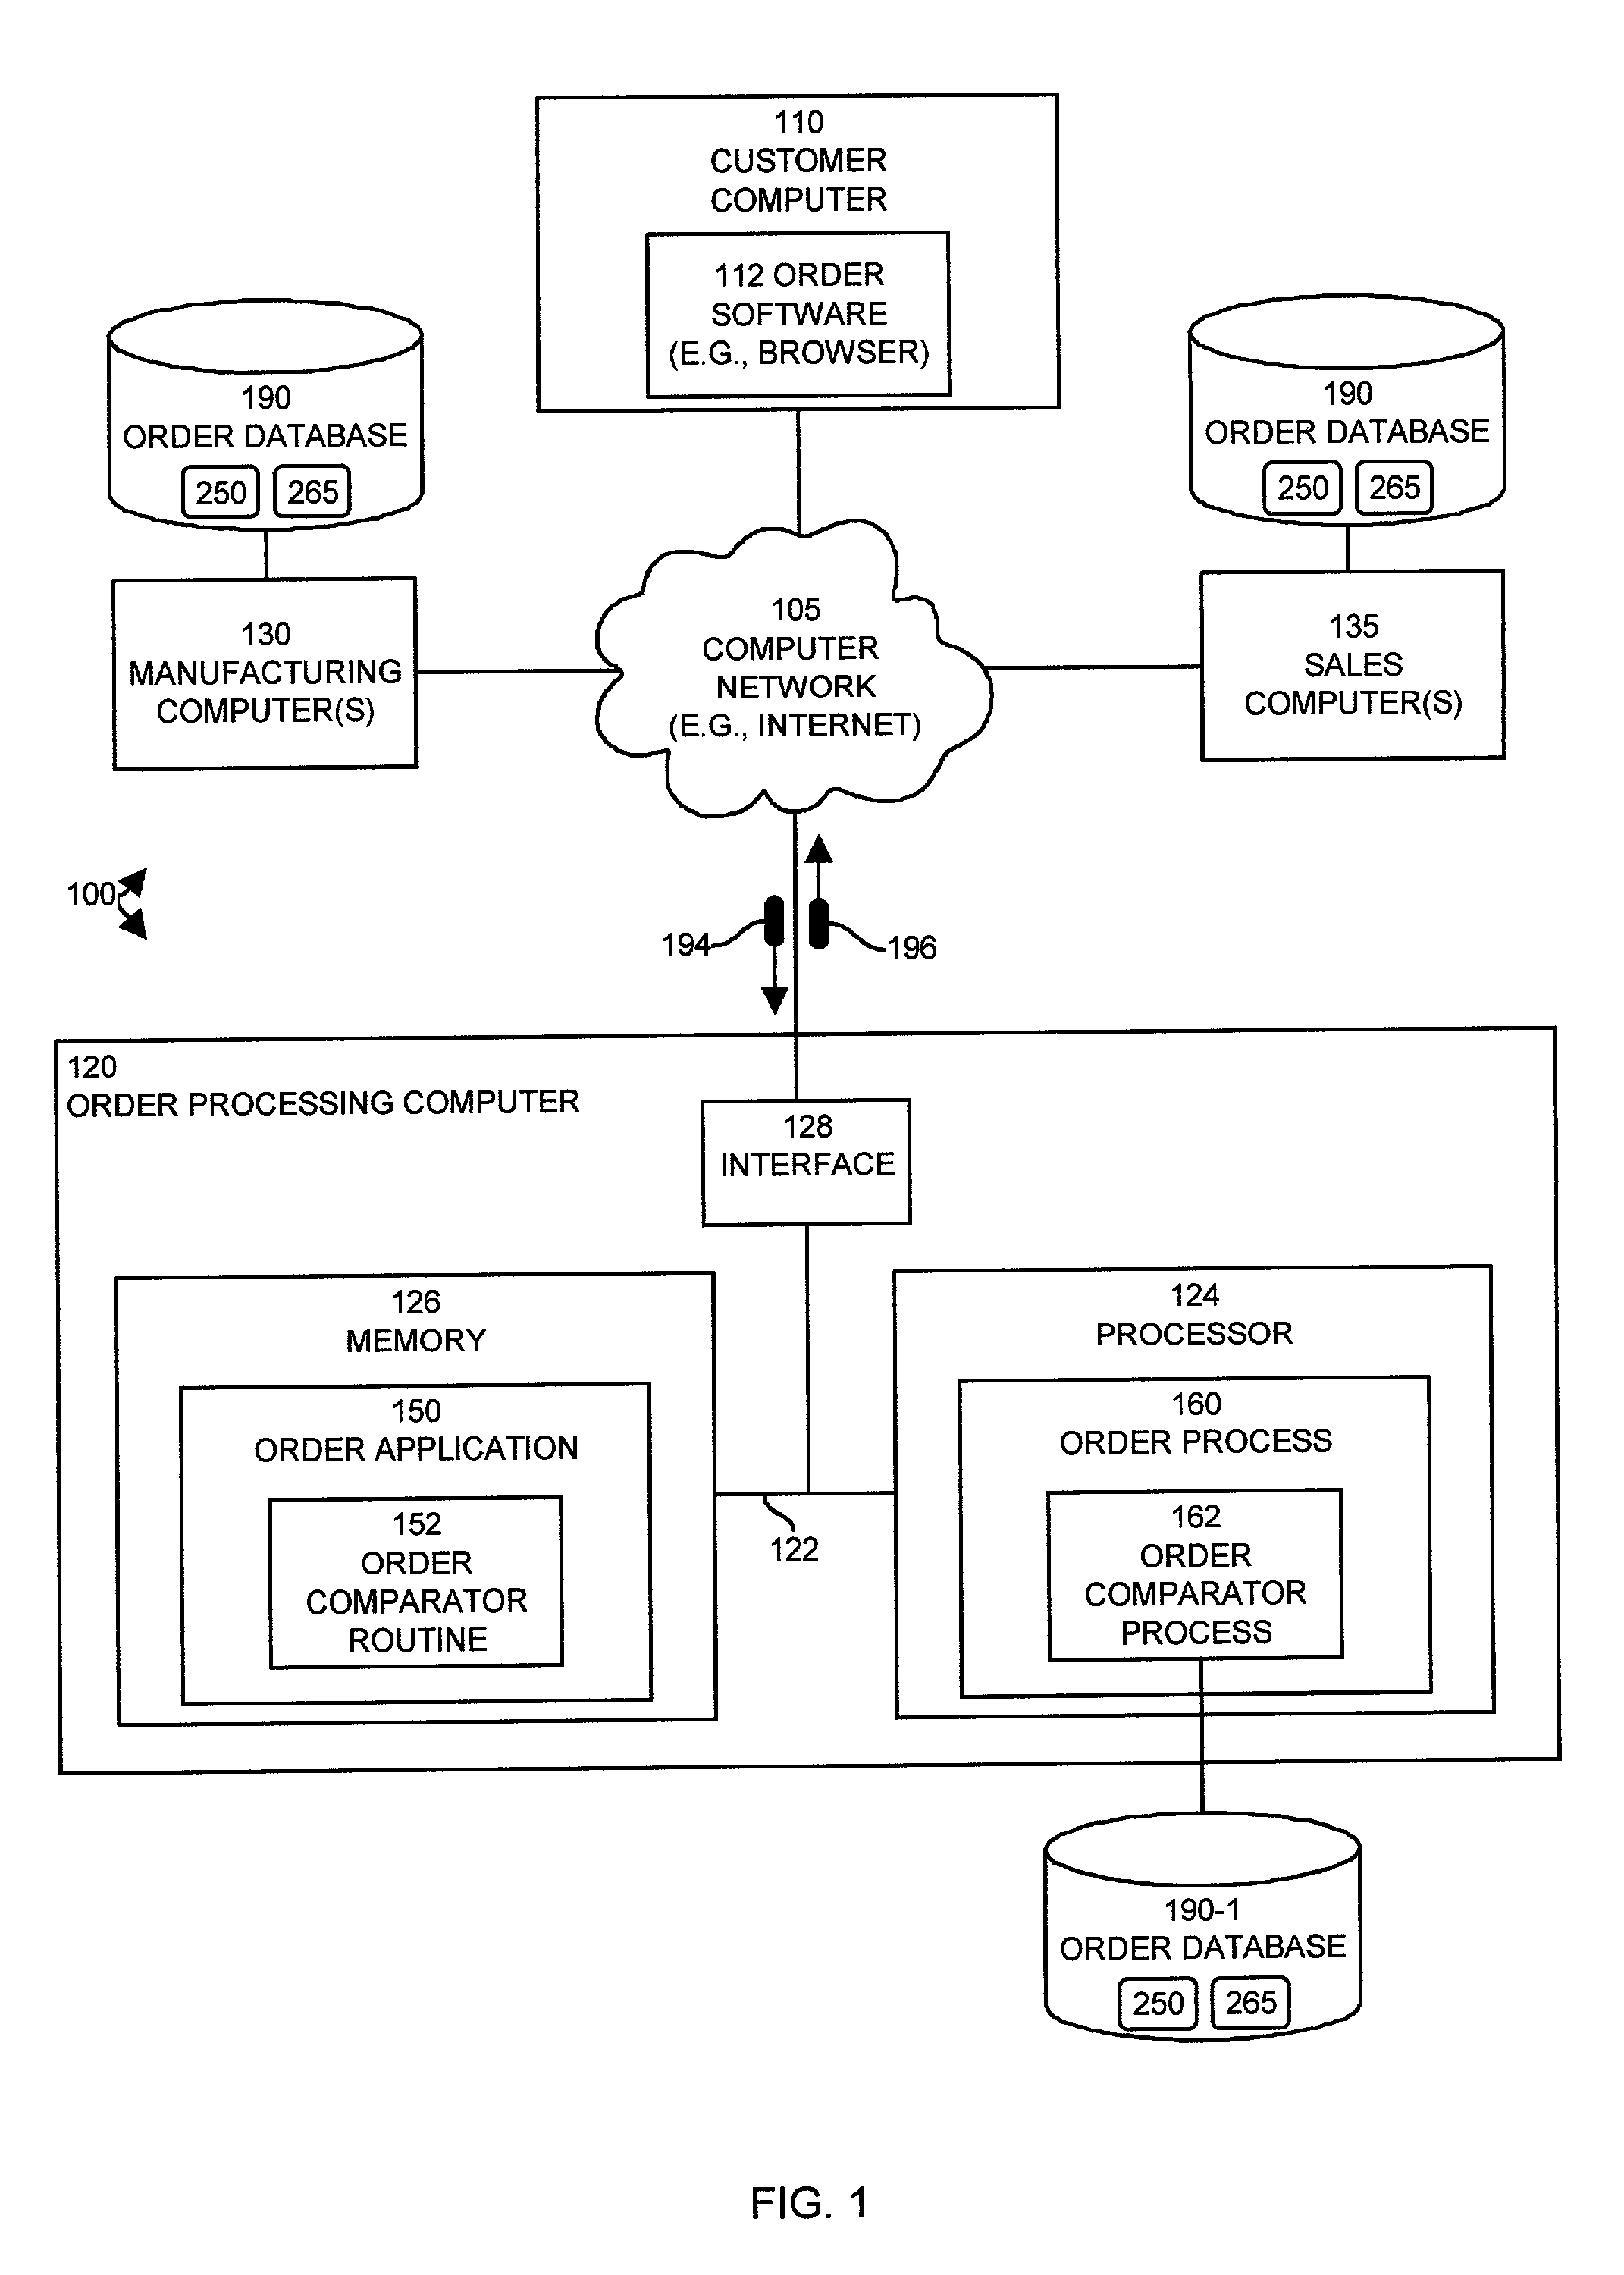 Methods and system for processing changes to existing purchase orders in an object-oriented order processing system